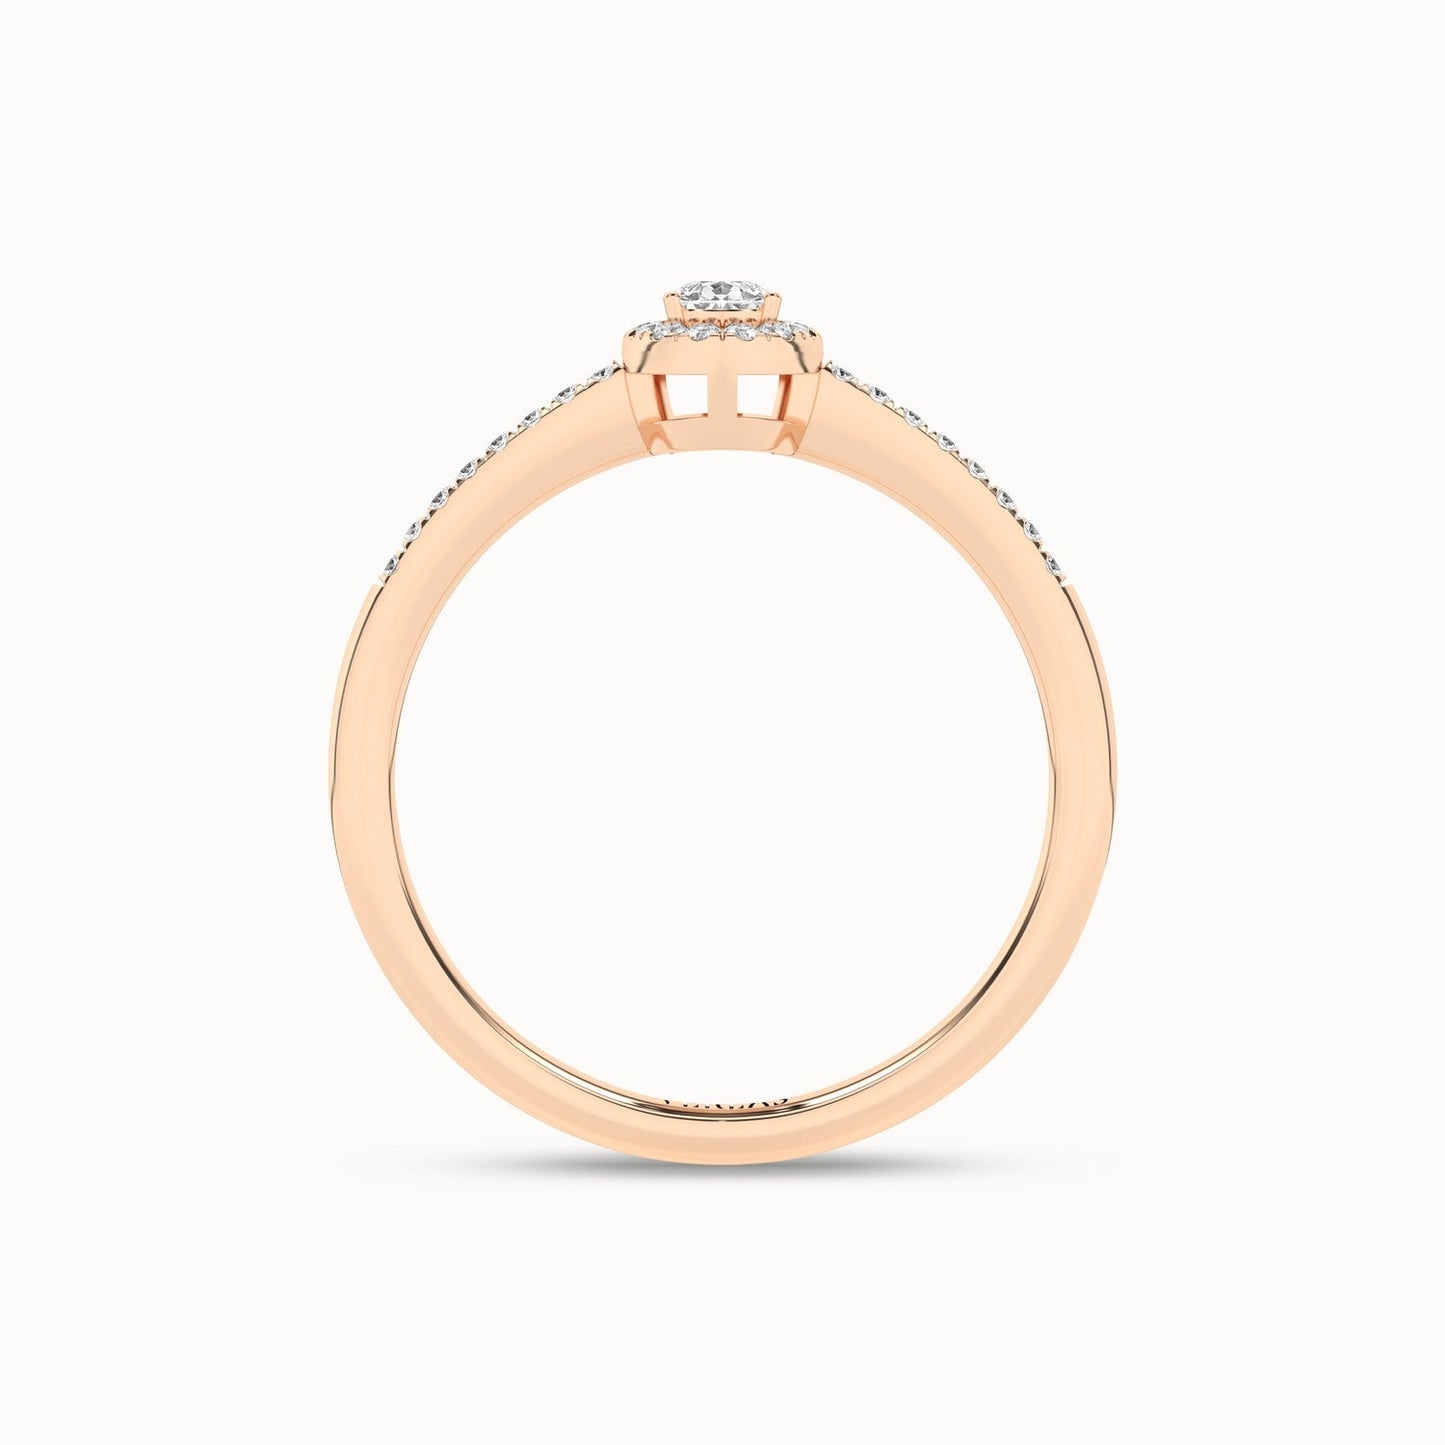 My Signature Dewdrop Halo Ring_Product Angle_1/5-2